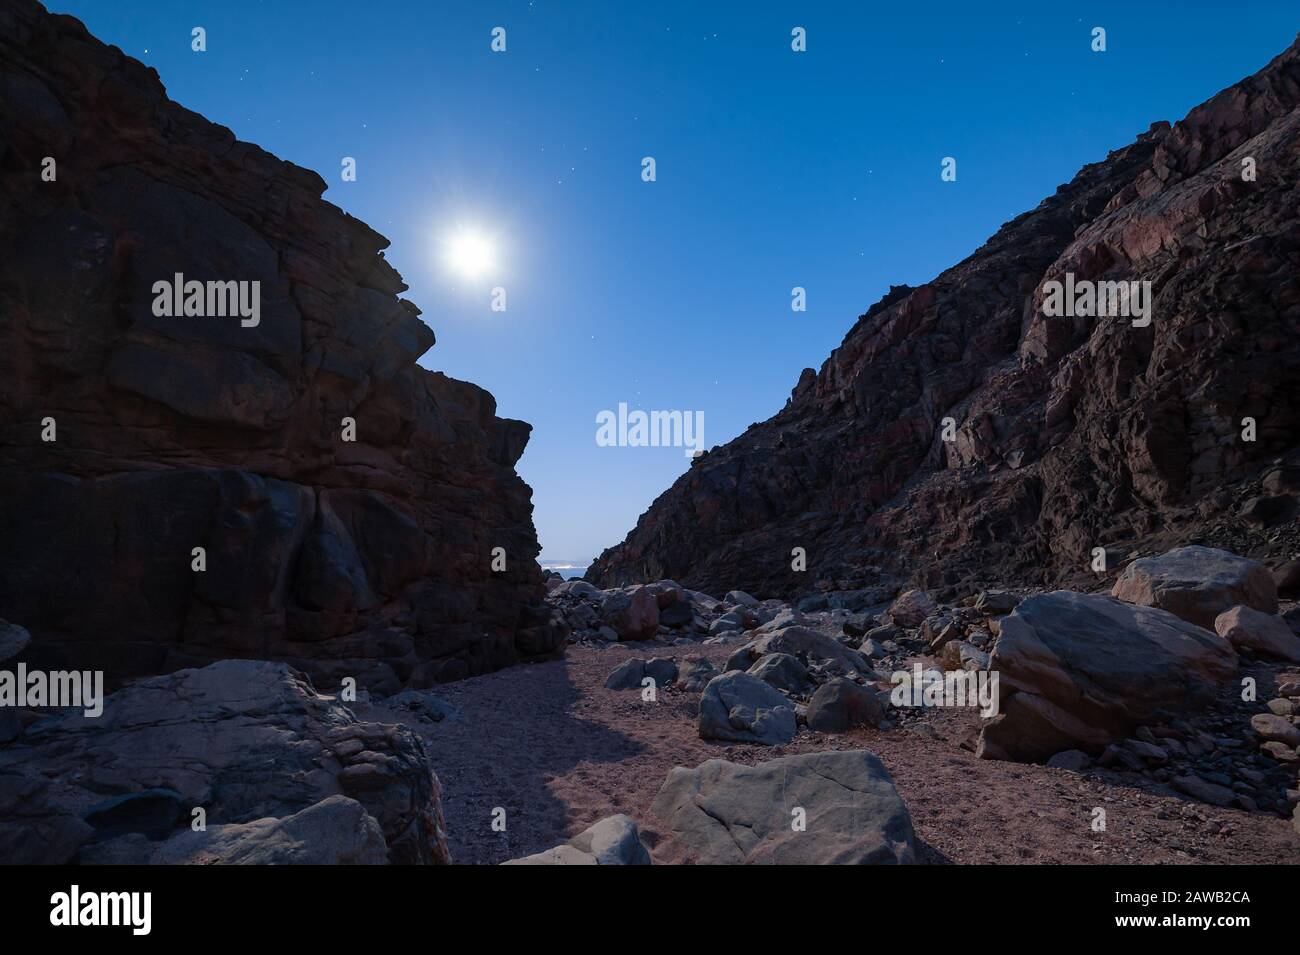 Night landscape with majestic mountains, moon and stars in sky, long exposure. Mountaineering and climb background Stock Photo